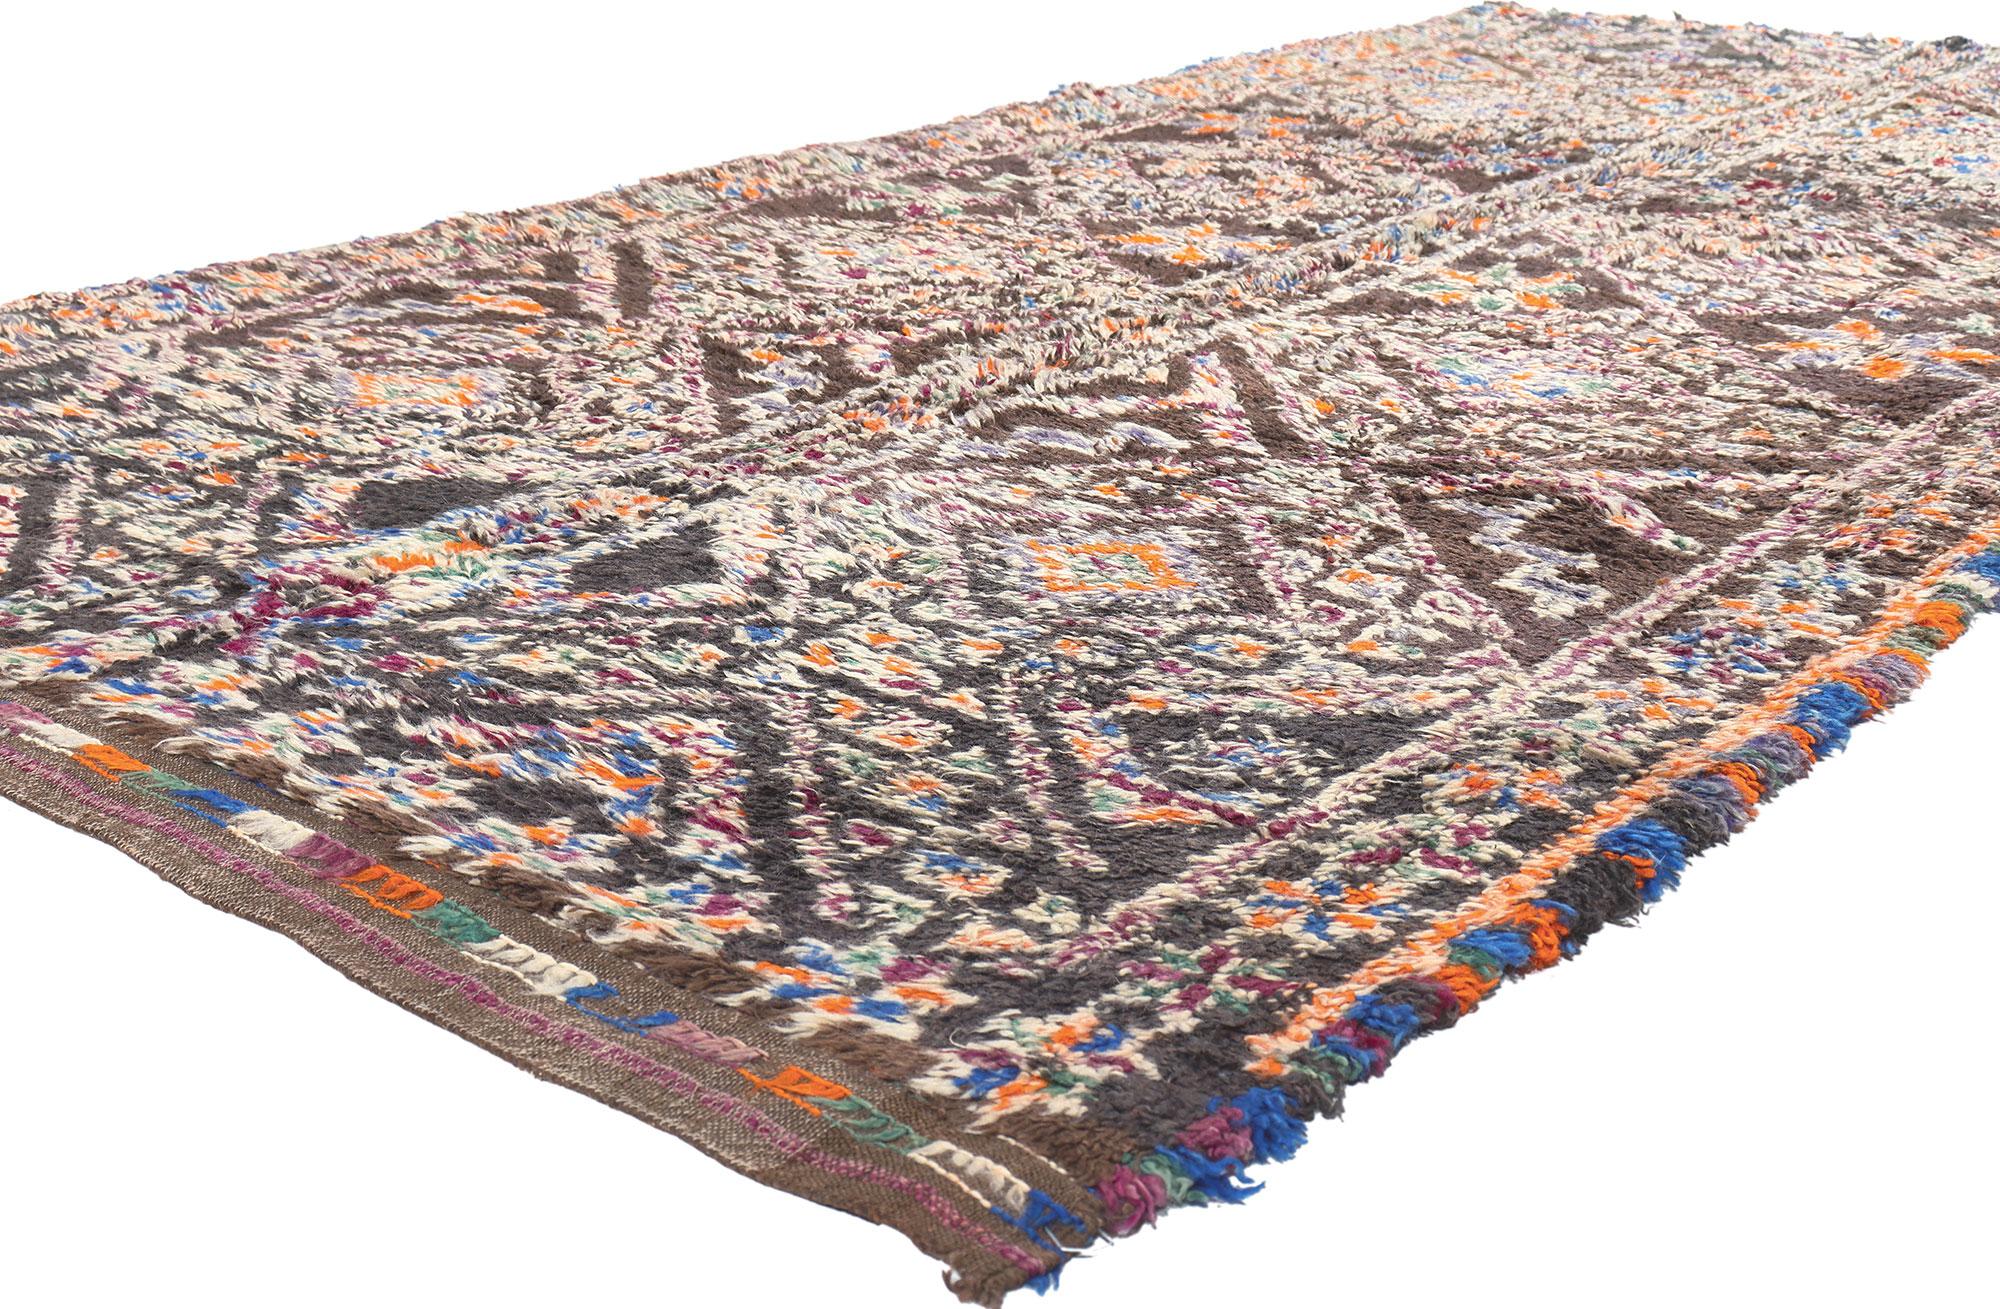 20943 Vintage Brown Beni MGuild Moroccan Rug, 05'02 x 11'07. Crafted with sustainable and biophilic design principles, this hand knotted wool vintage Beni Mguild Moroccan rug is a testament to the enchanting expertise of Berber women from the Ait